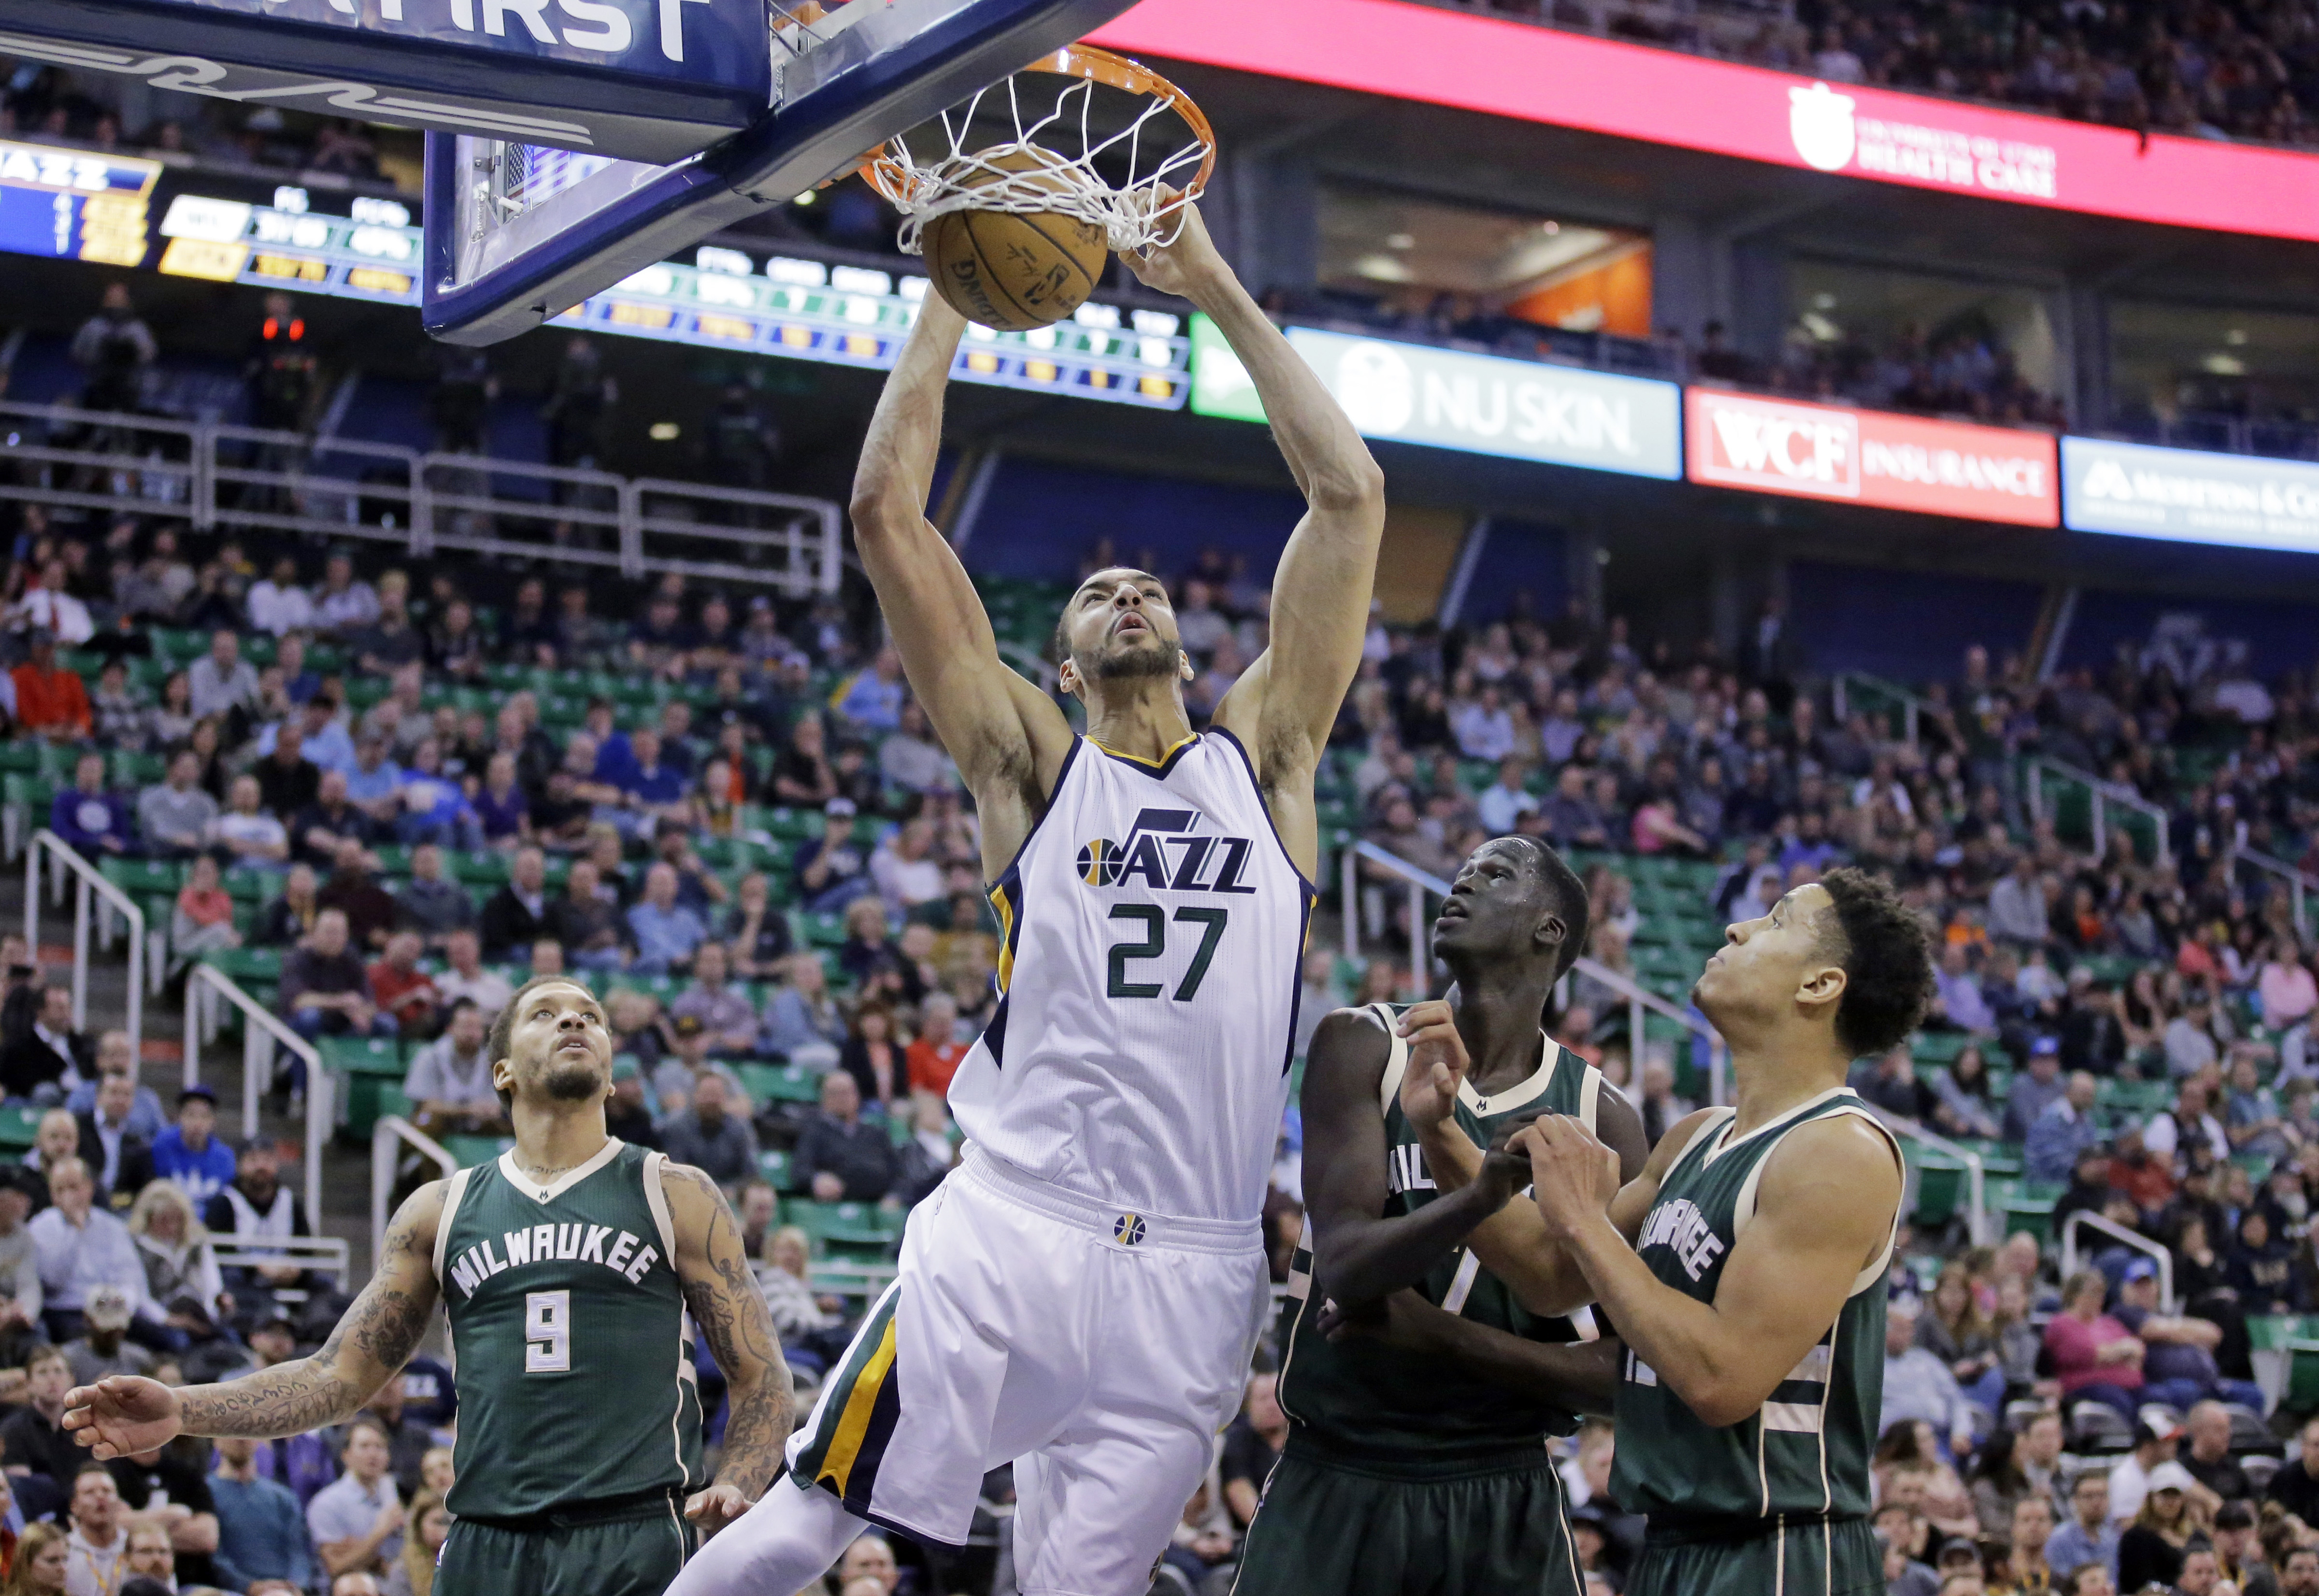 Utah Jazz center Rudy Gobert (27) dunks the ball as Milwaukee Bucks' Michael Beasley (9), Thon Maker, second from right, and Malcolm Brogdon, right, look on in the second half during an NBA basketball game, Wednesday, Feb. 1, 2017, in Salt Lake City. (AP Photo/Rick Bowmer)